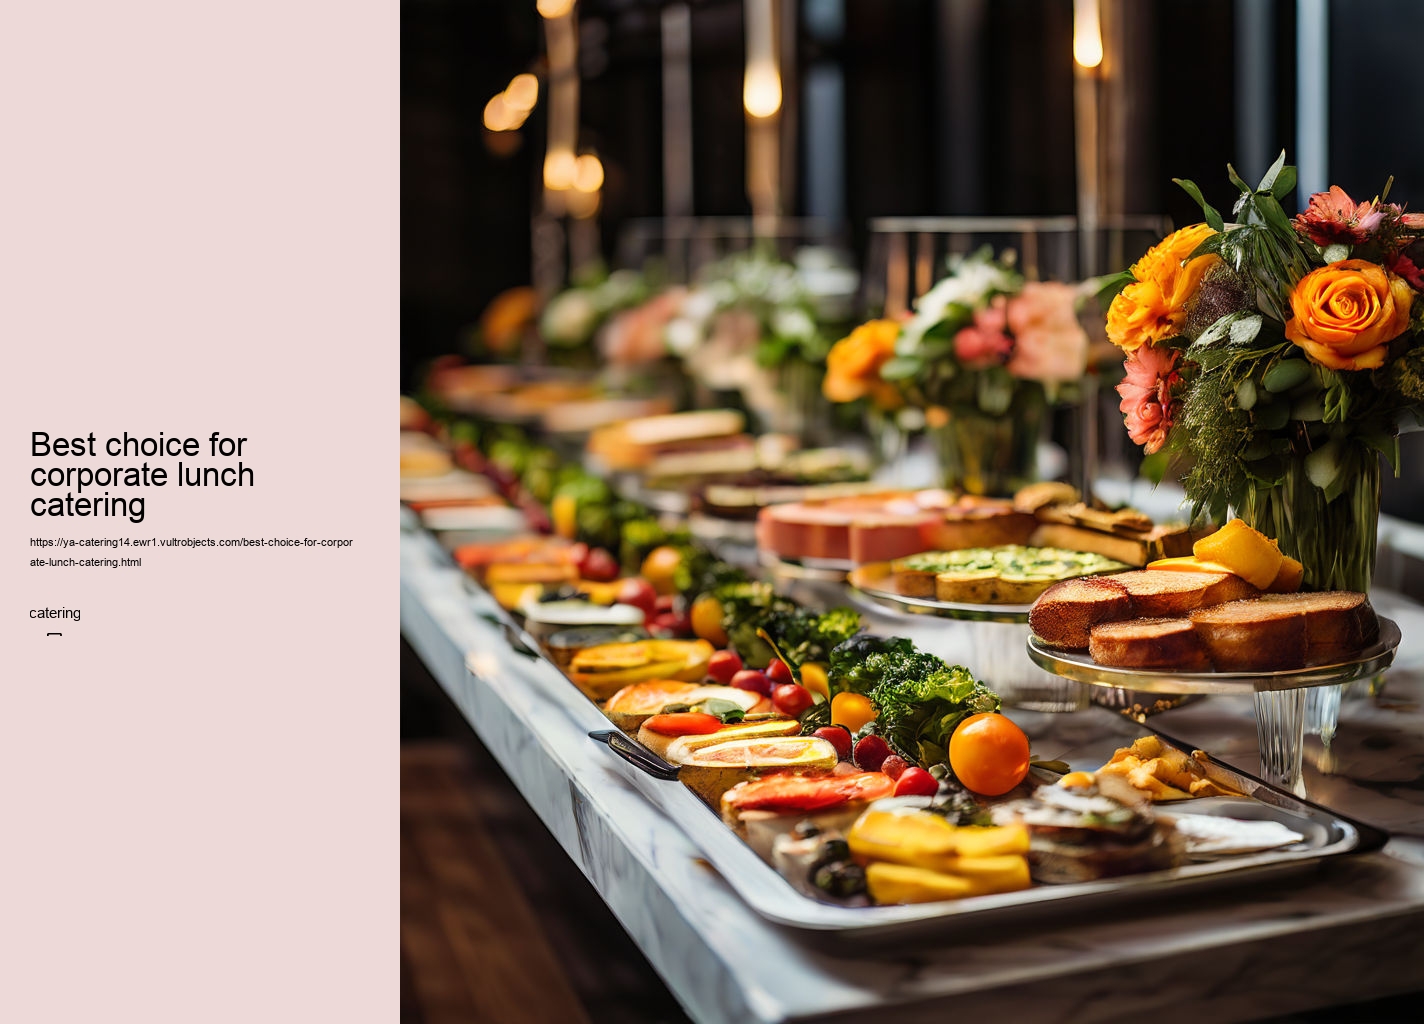 Best choice for corporate lunch catering